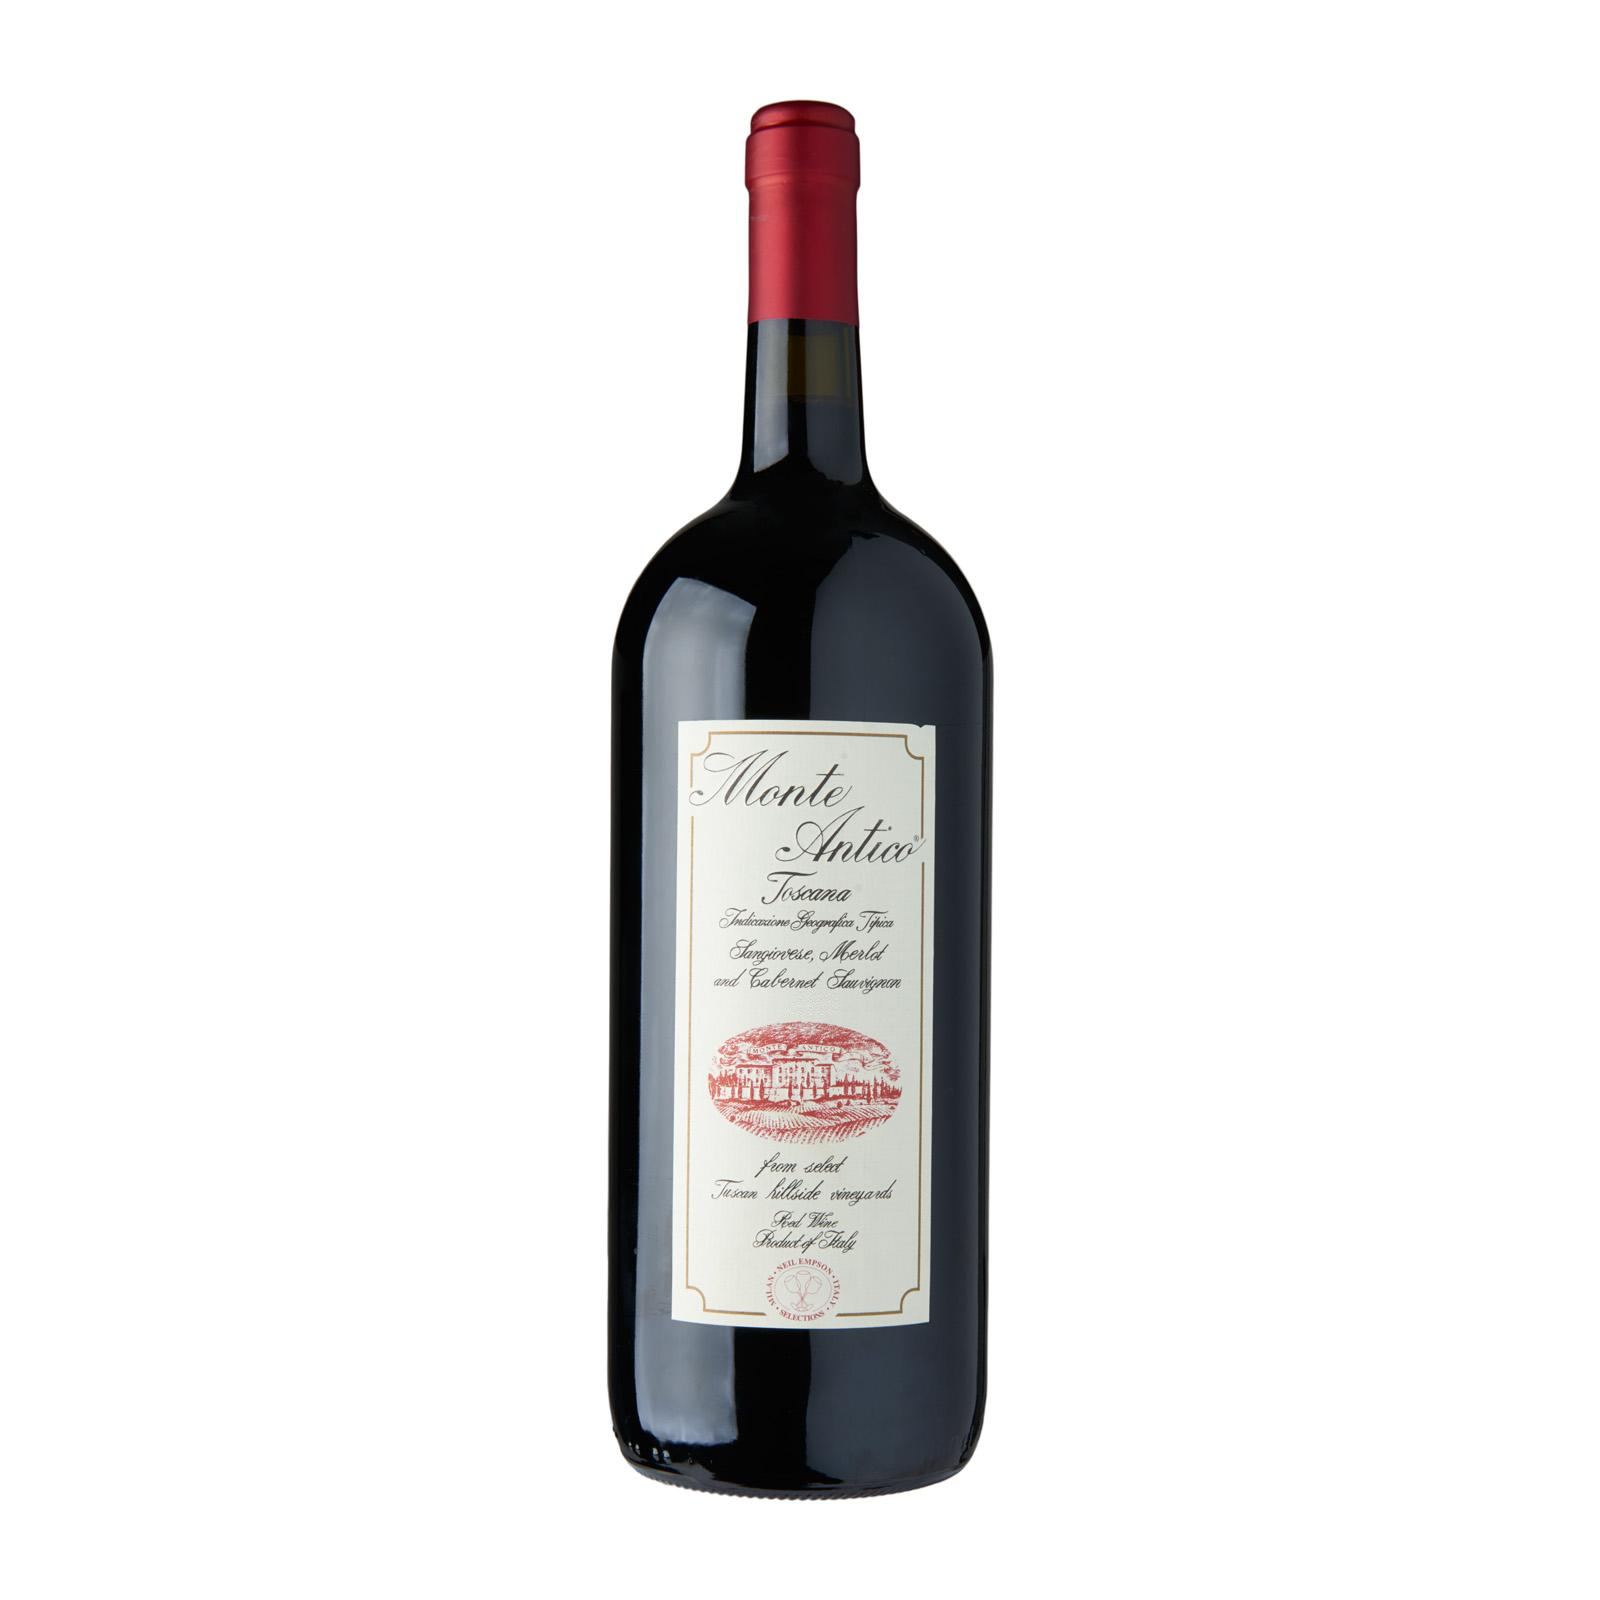 Monte Antico Toscana IGT Super Tuscan 2019 Red Wine 1.5L Magnum – Tuscany, Italy